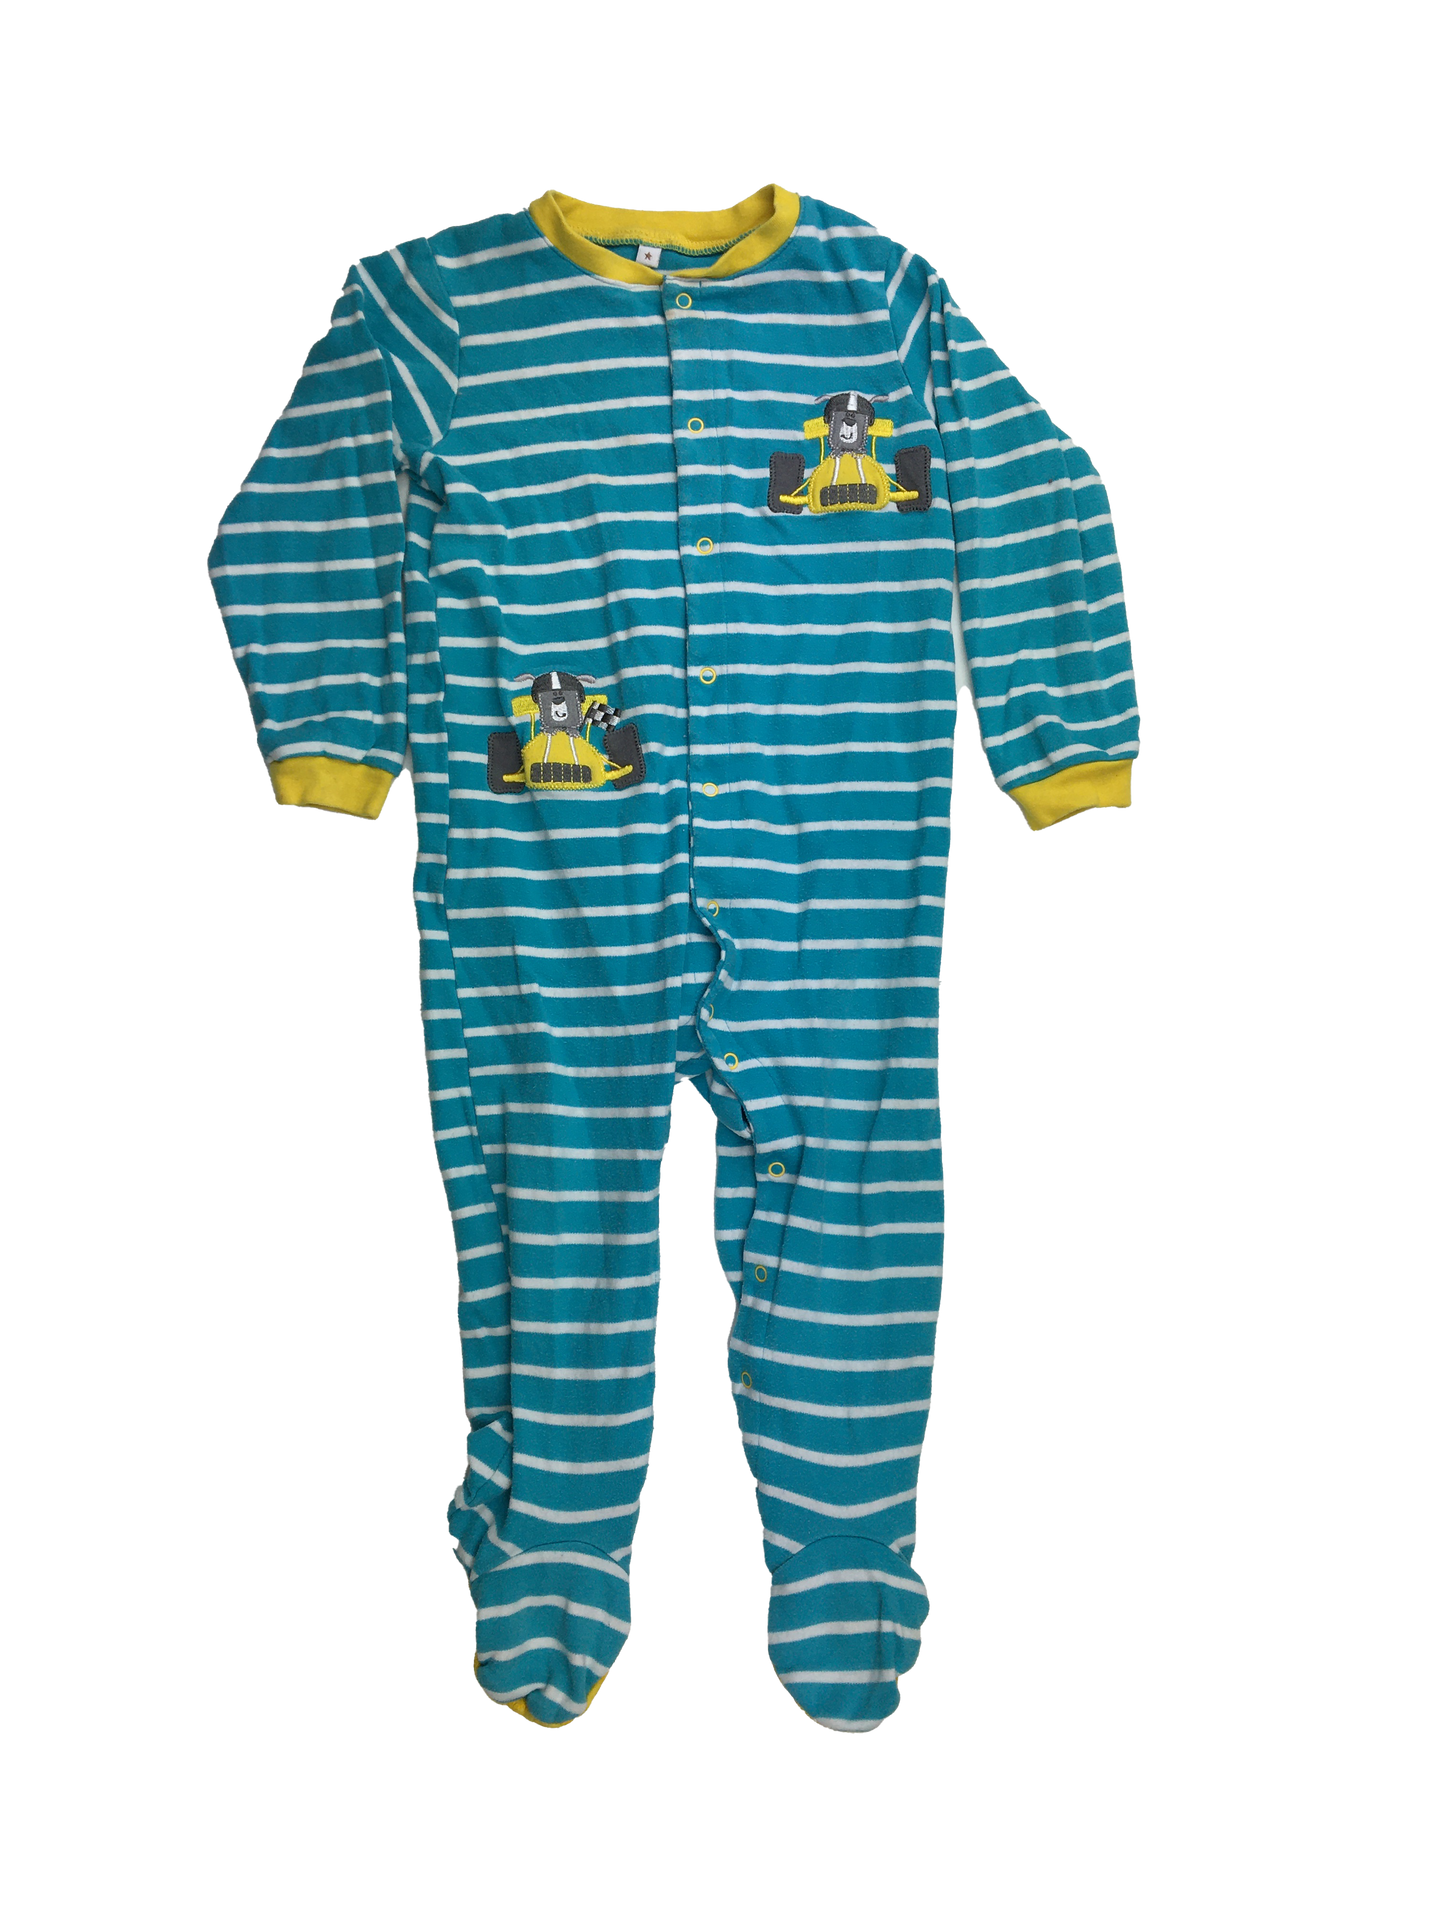 Pekkle Blue & White Striped Footed Sleeper with Race Cars 2T